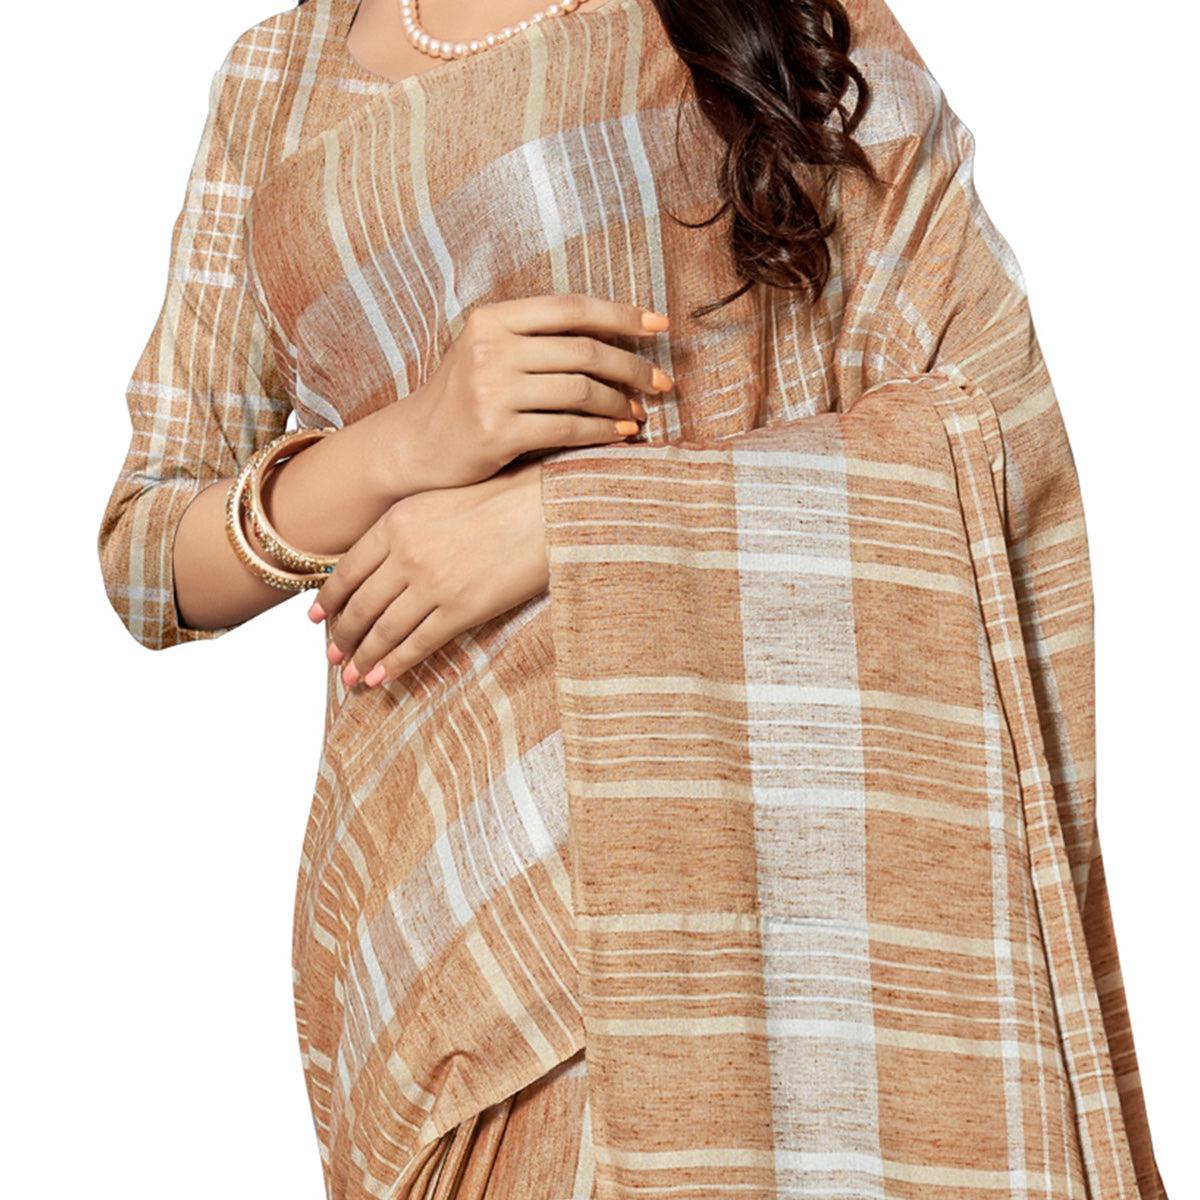 Groovy Brown Colored Fesive Wear Stripe Print Cotton Silk Saree With Tassels - Peachmode